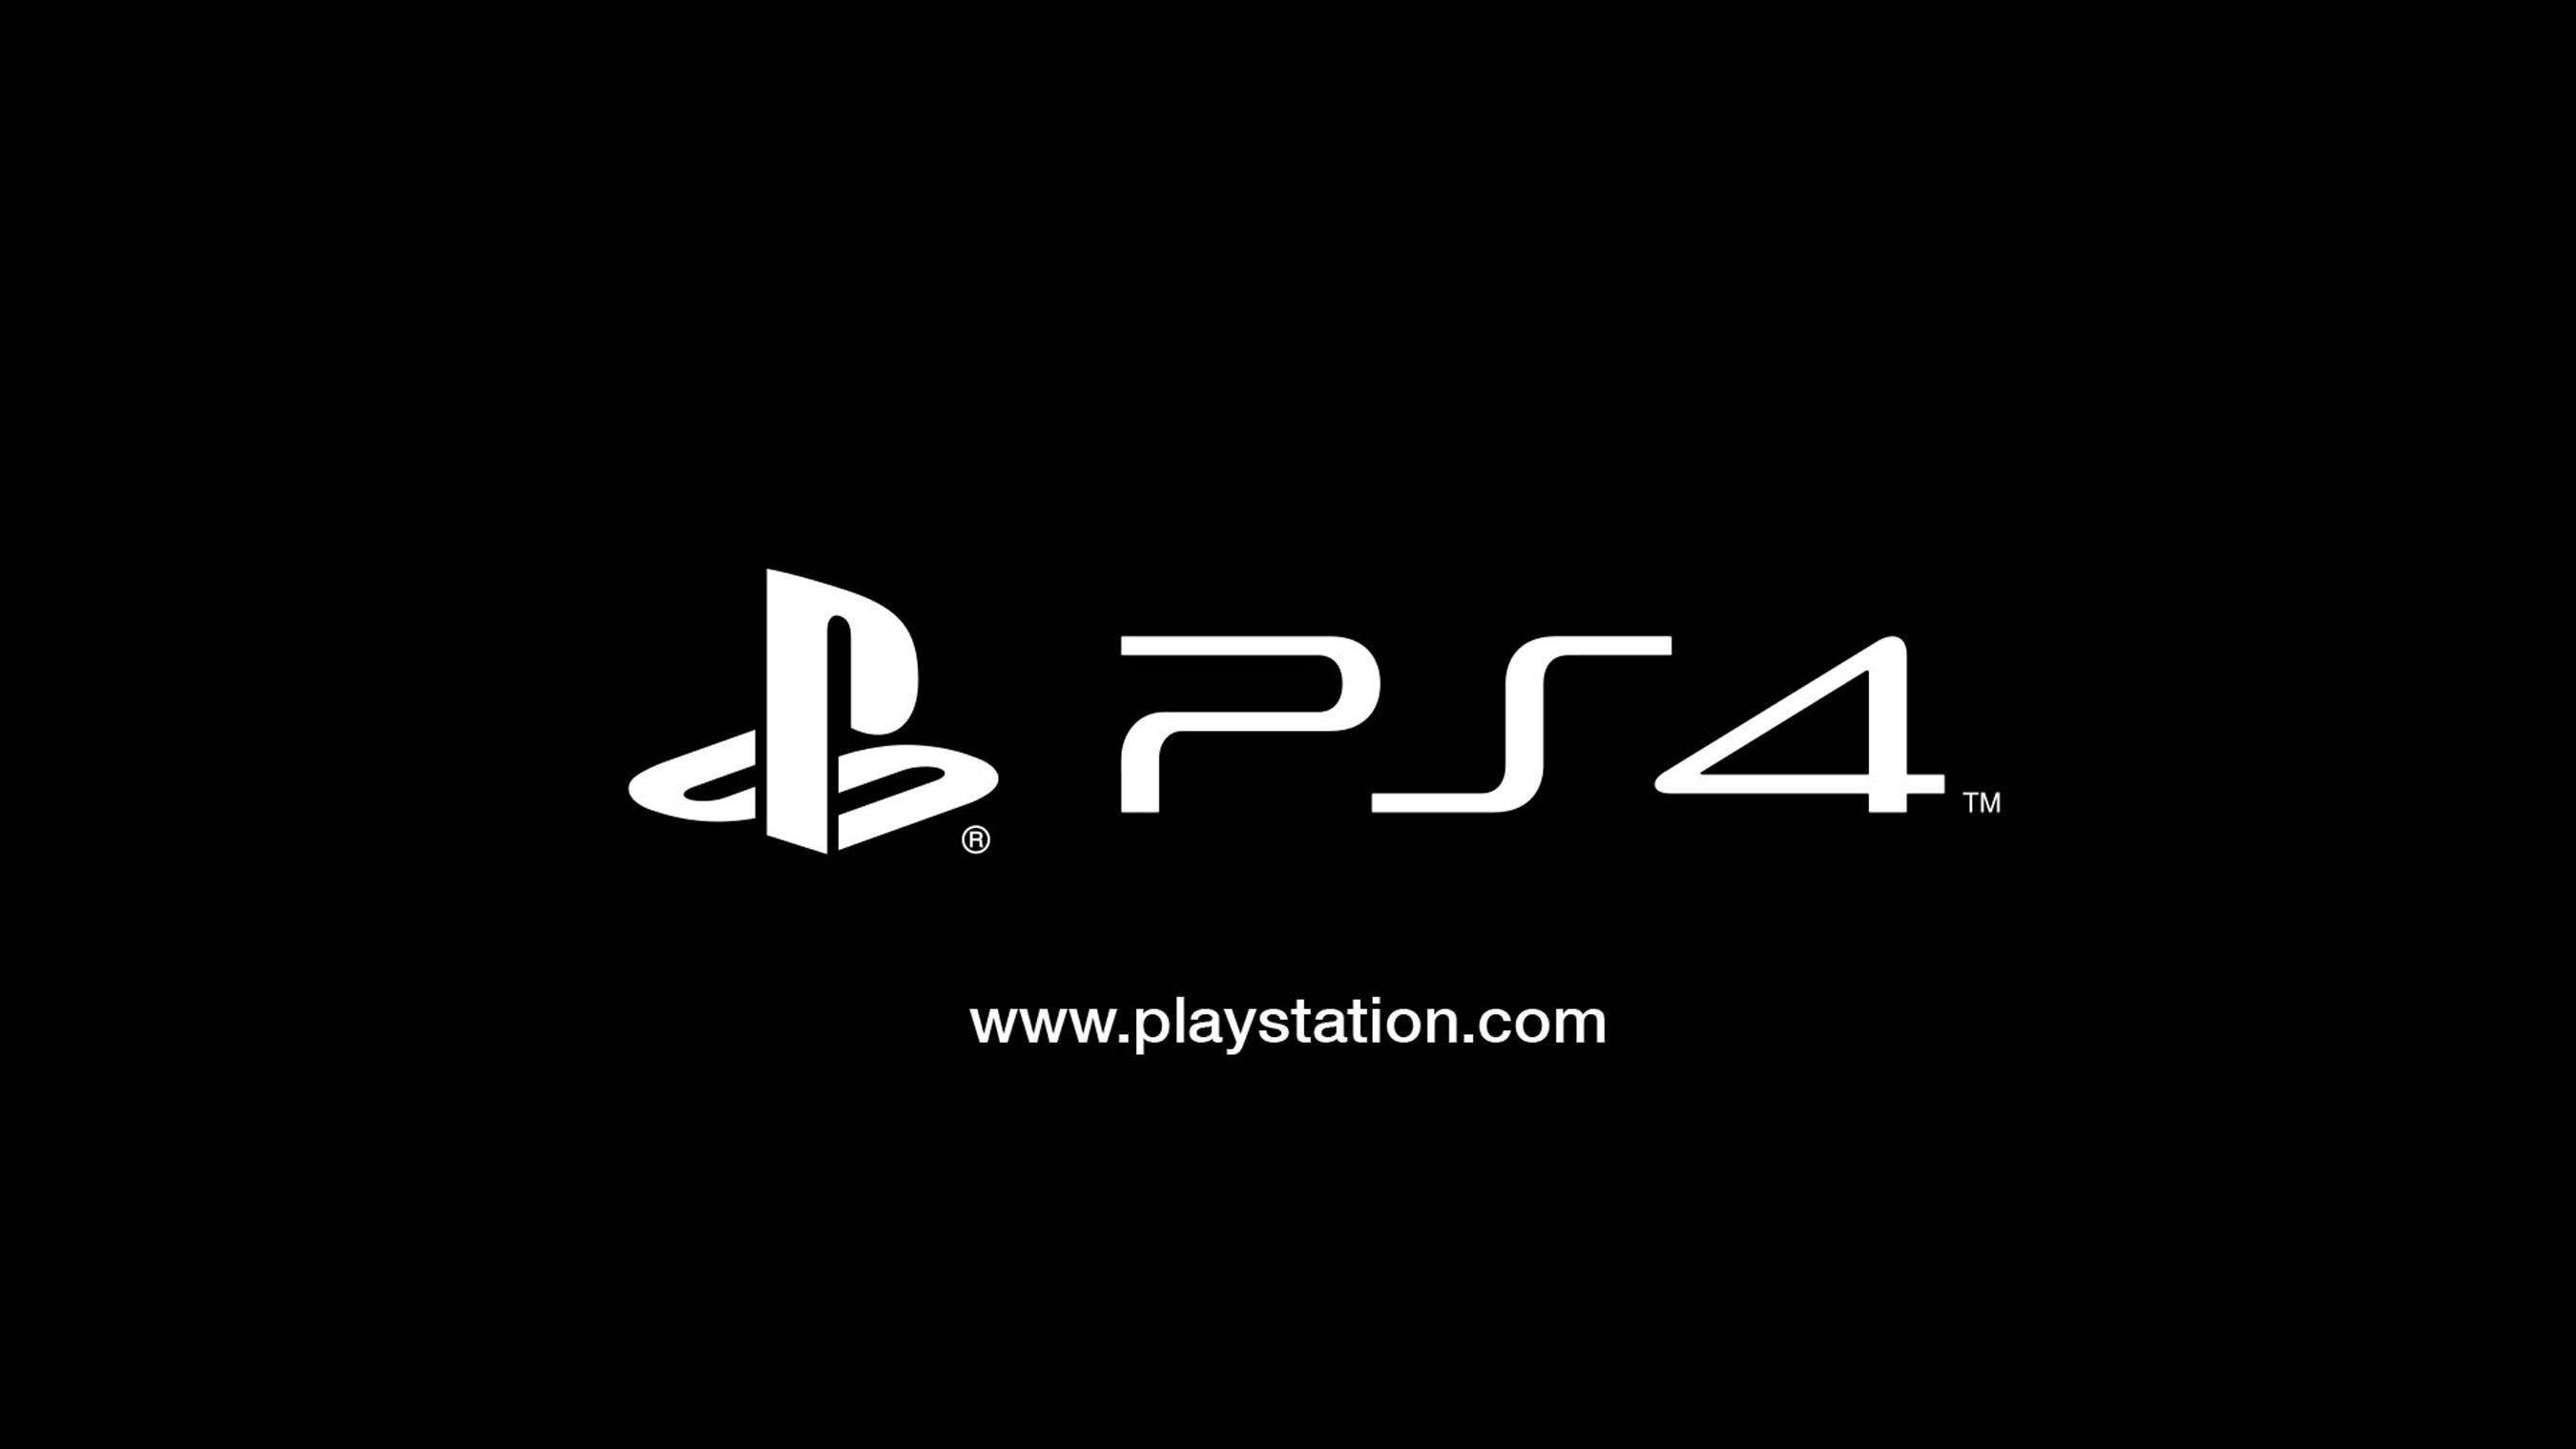 HD Sony Playstation Wallpaper and Photo. HD Products Wallpaper